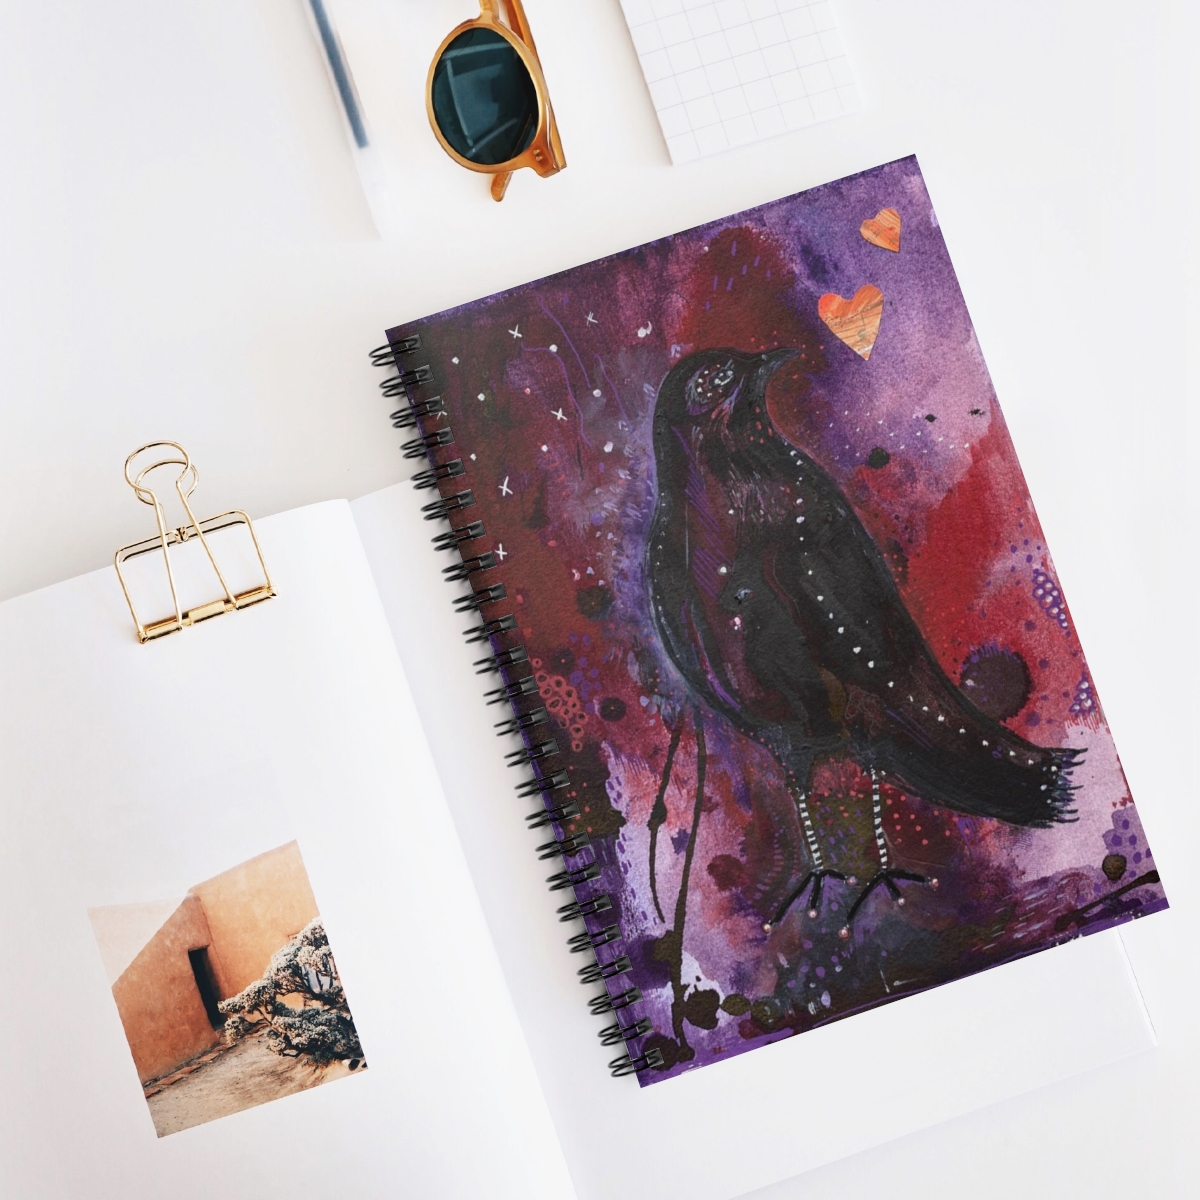 Special journal in context- crow design on an abstract background of purple tomes.